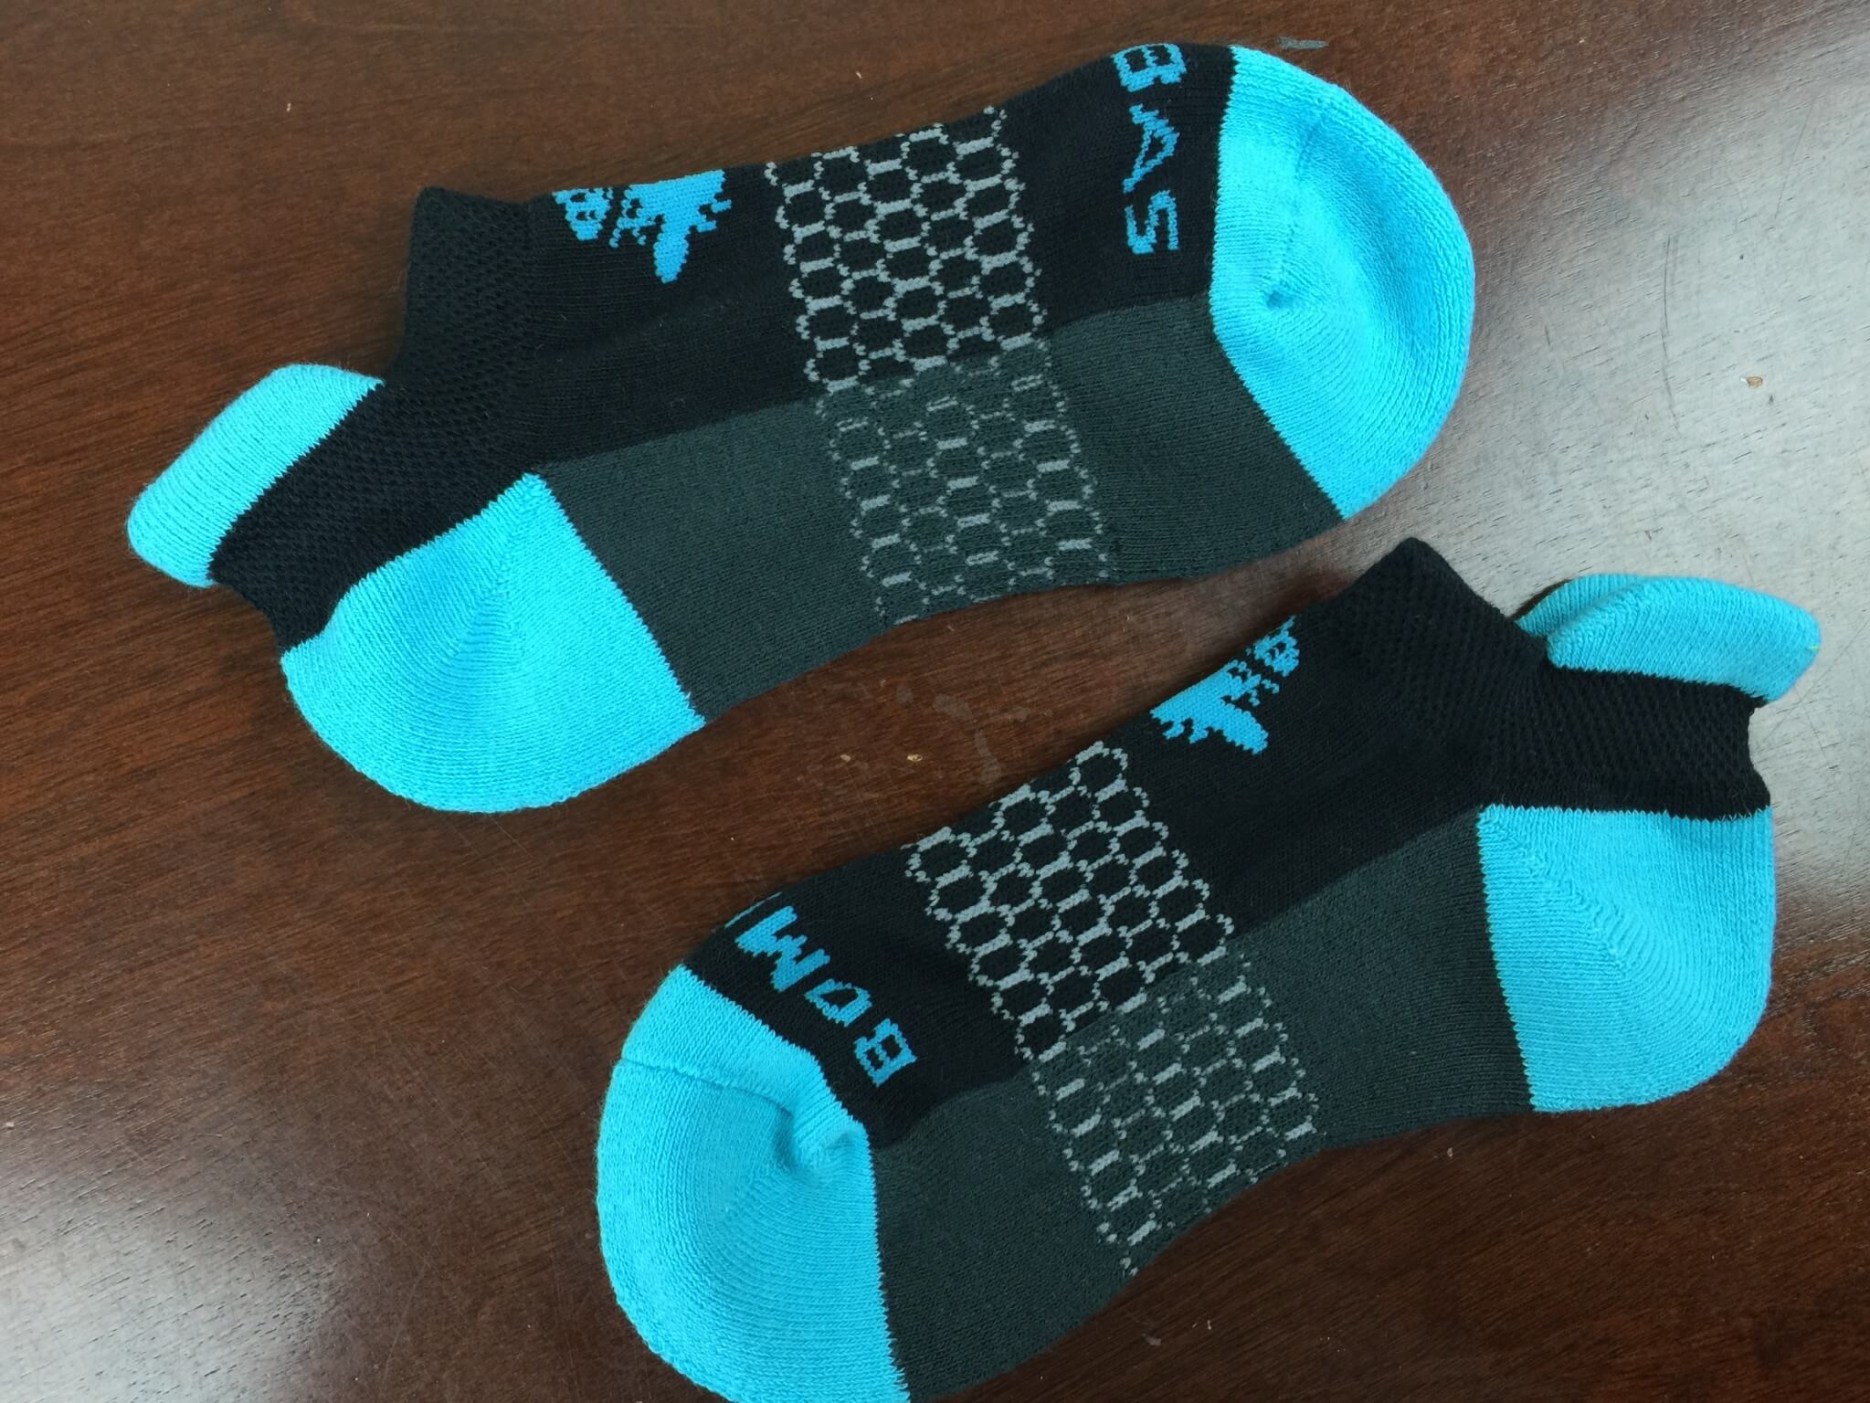 Bombas Socks Review: The Socks I Wish Had a Subscription, But Don't ...